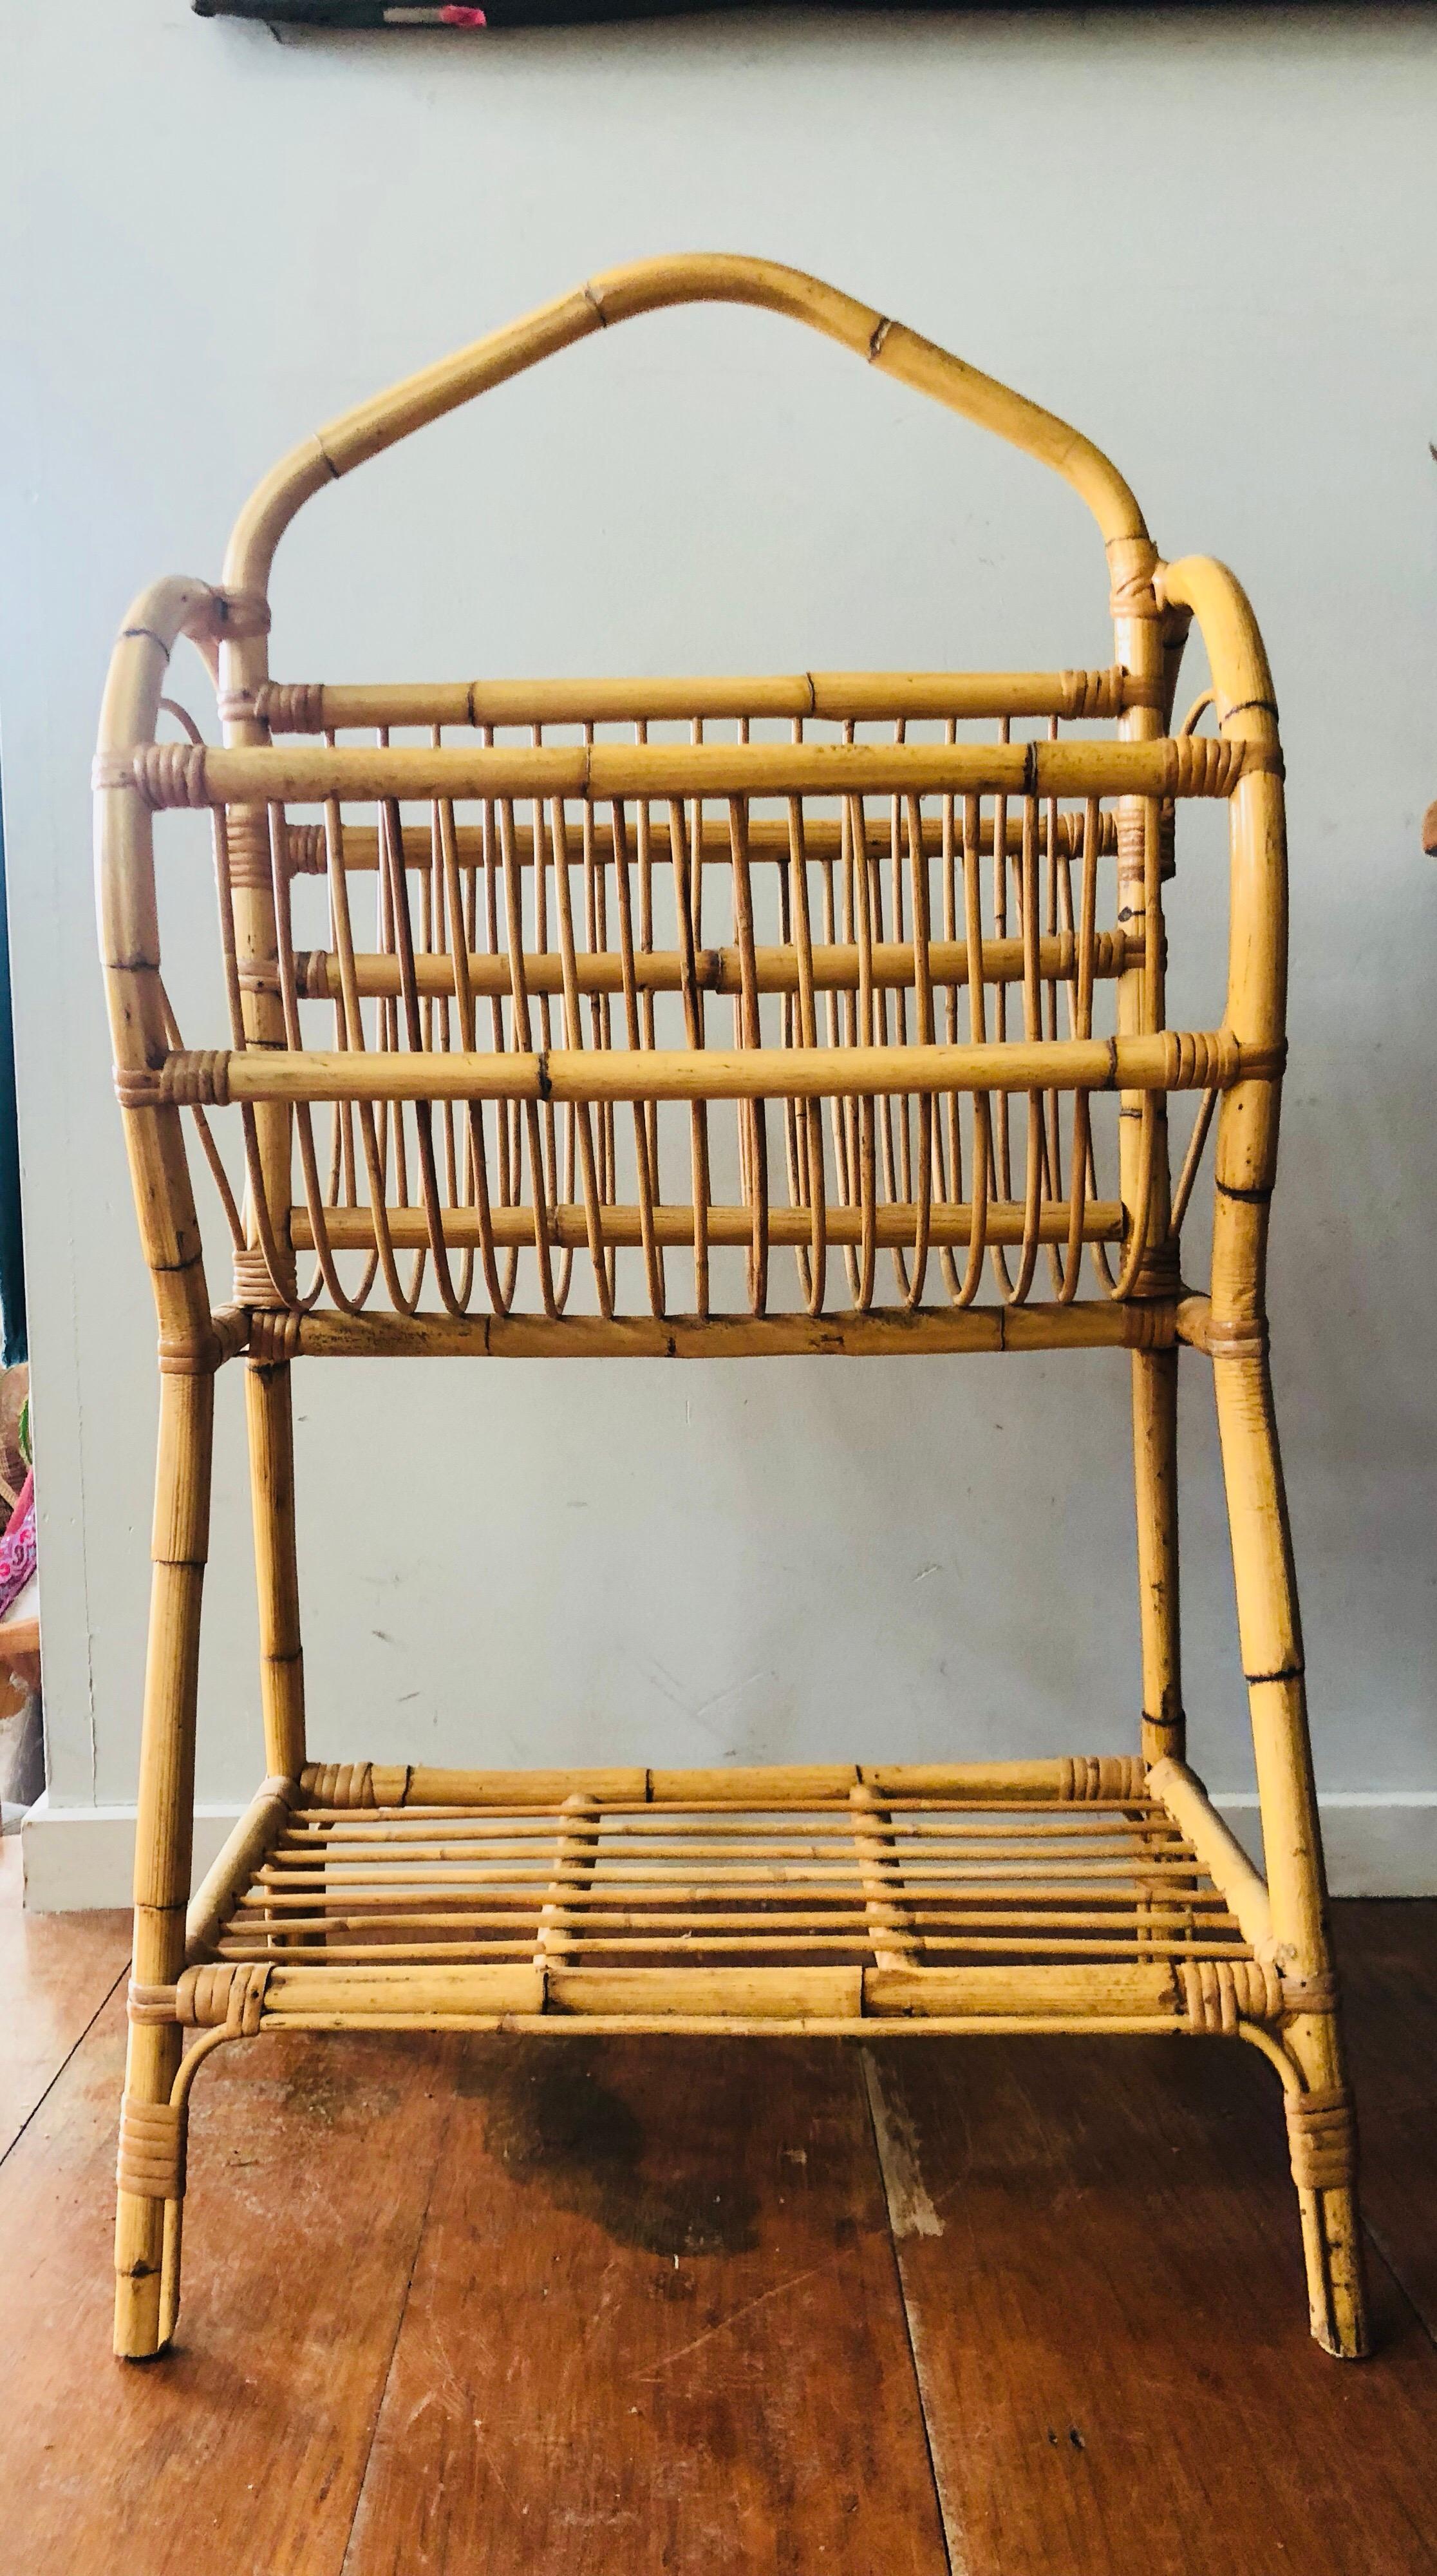 Mid-20th century cane unusual tall magazine rack
Heart shaped ends and flat storage rack to base
Nice color and definition.